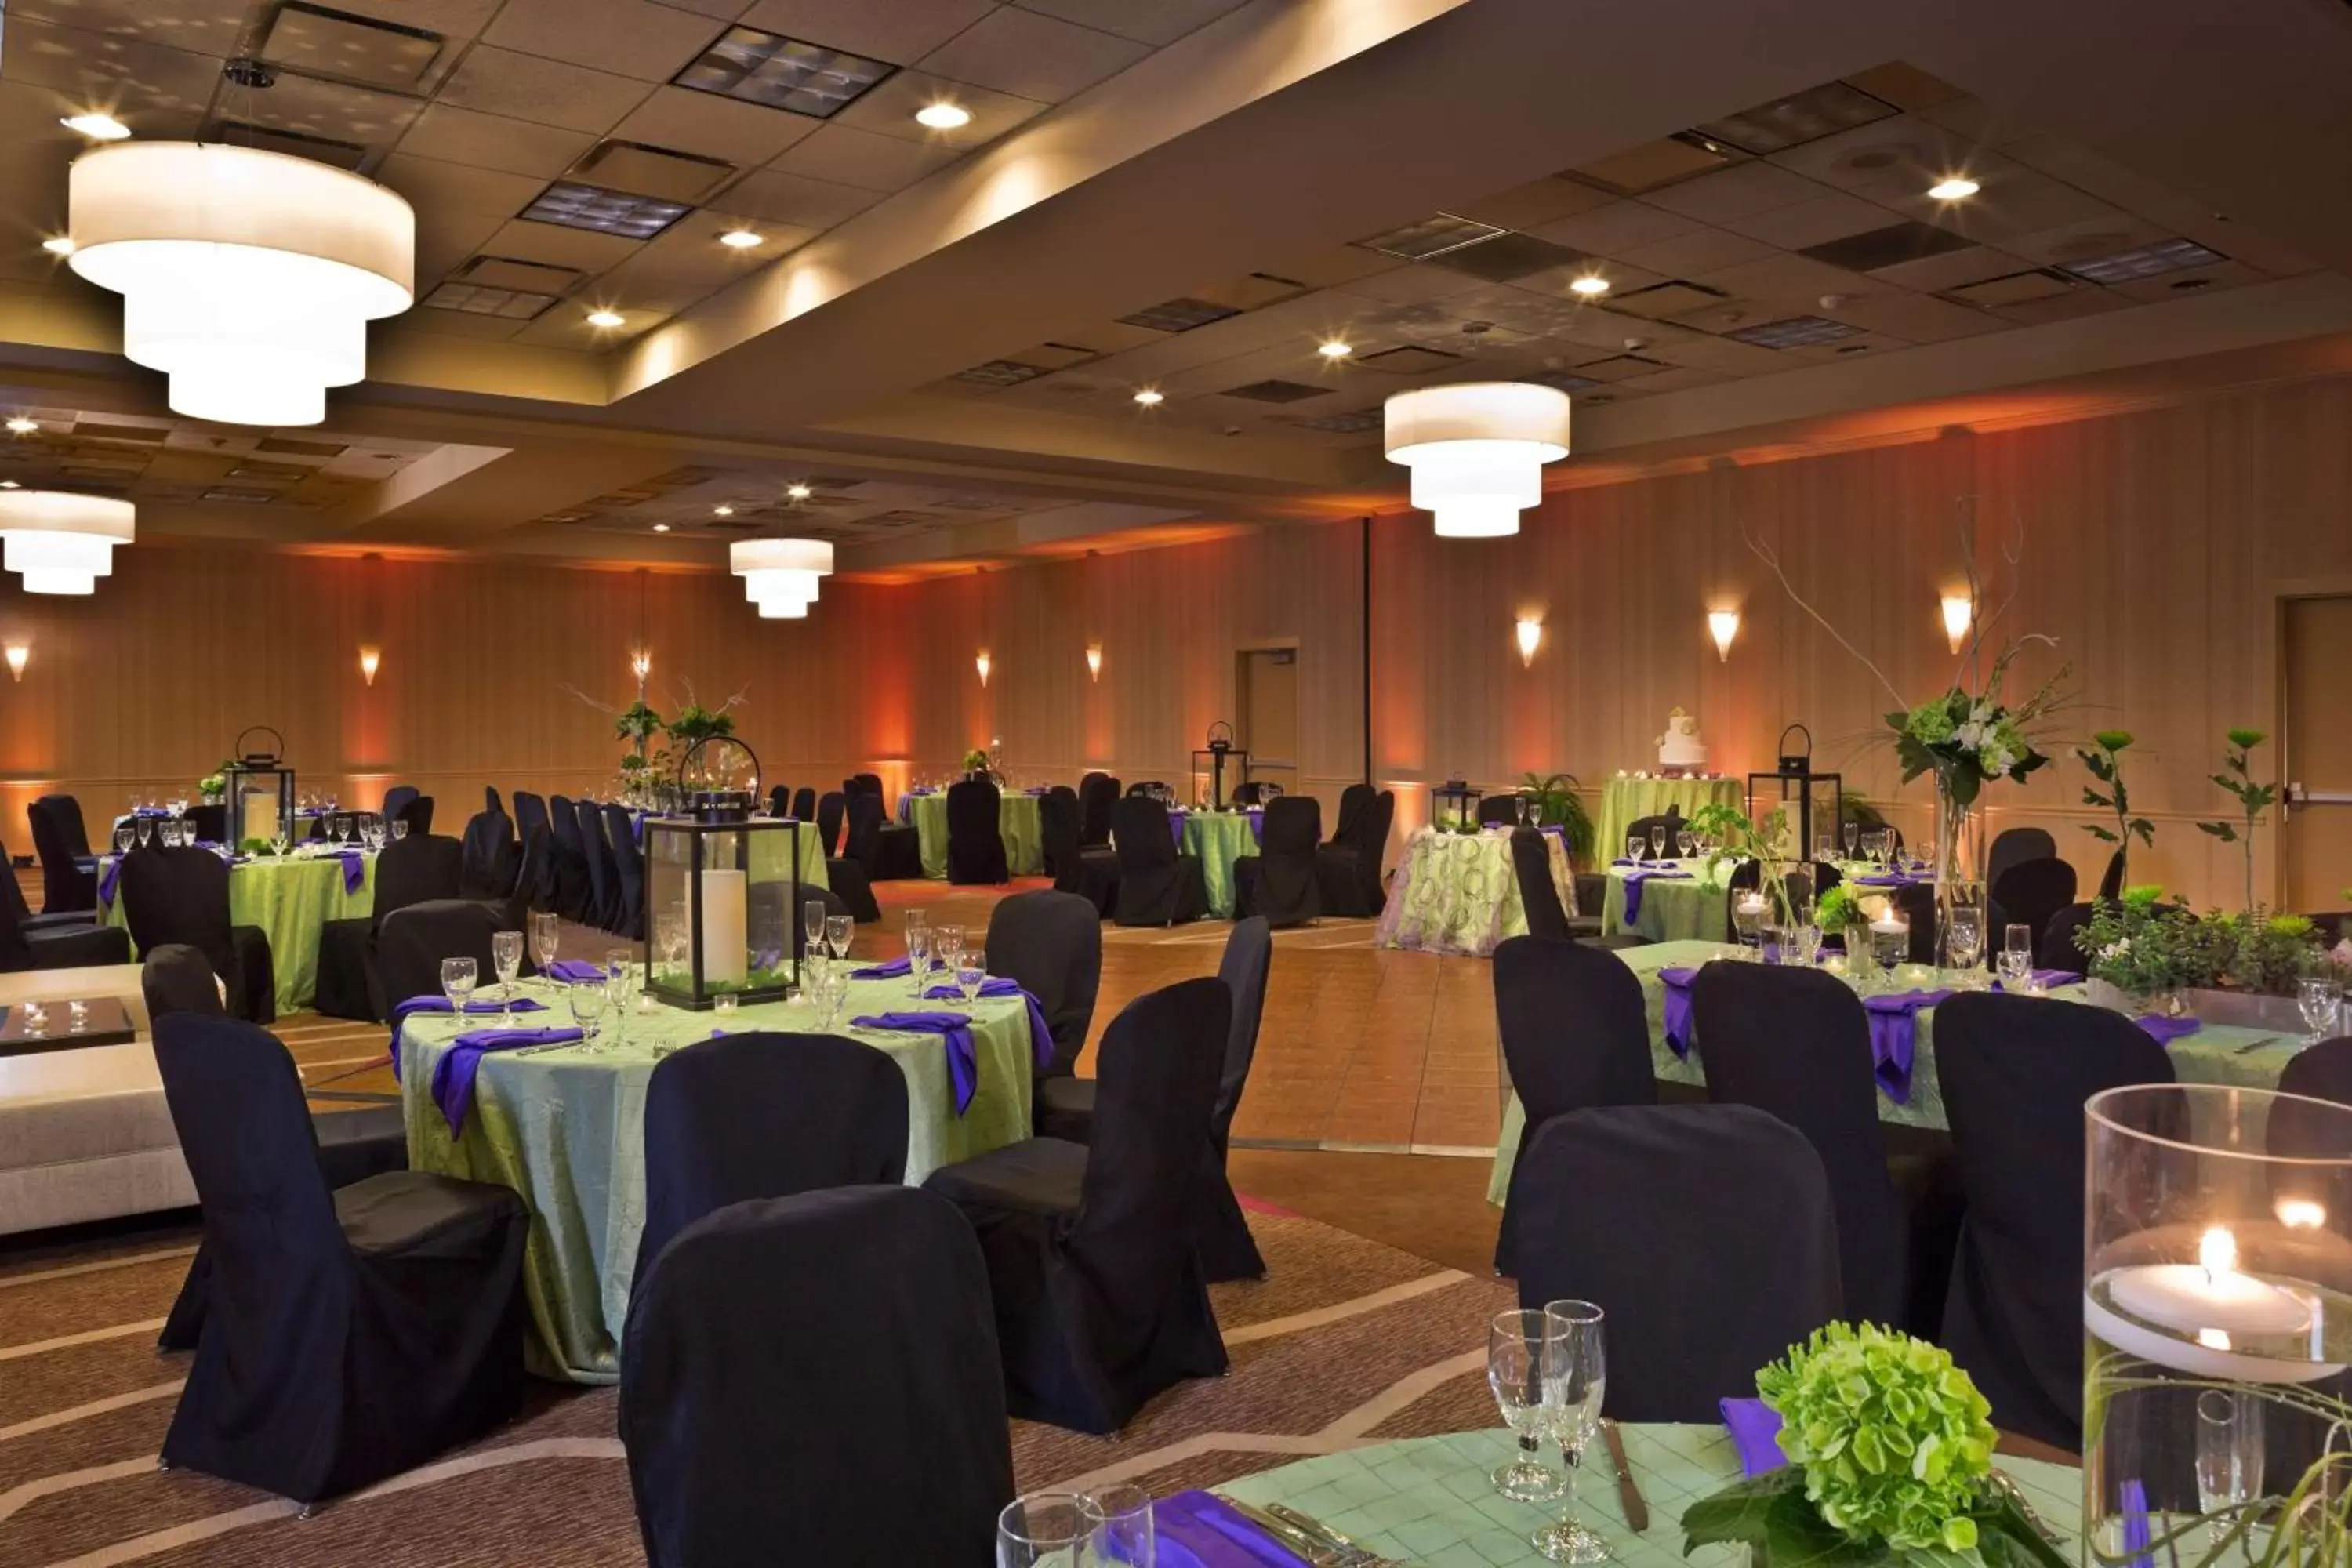 Meeting/conference room, Banquet Facilities in Hilton Garden Inn White Marsh